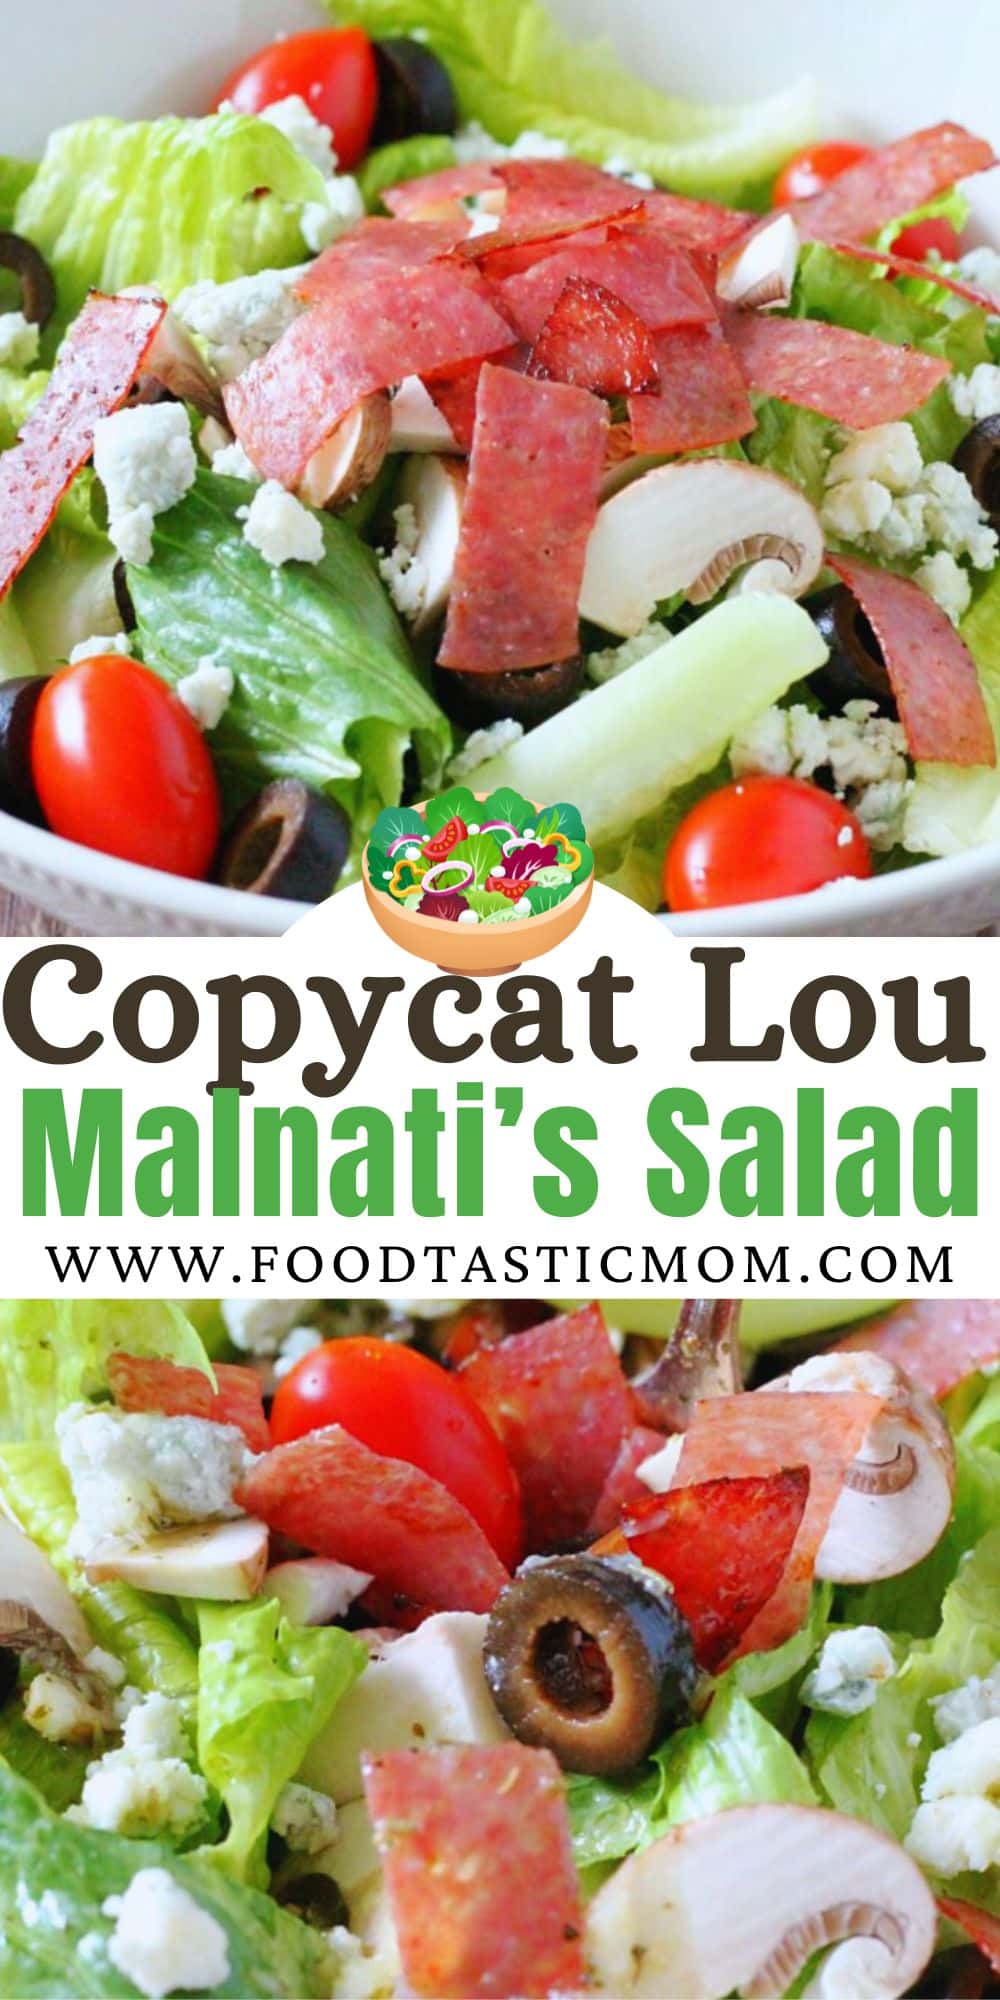 This copycat Lou Malnati's salad will help take you on a virtual trip to Chicago. Sweet Italian dressing tops romaine, tomatoes, mushrooms and black olives - the crispy salami helps to really make this a stand-out salad. via @foodtasticmom